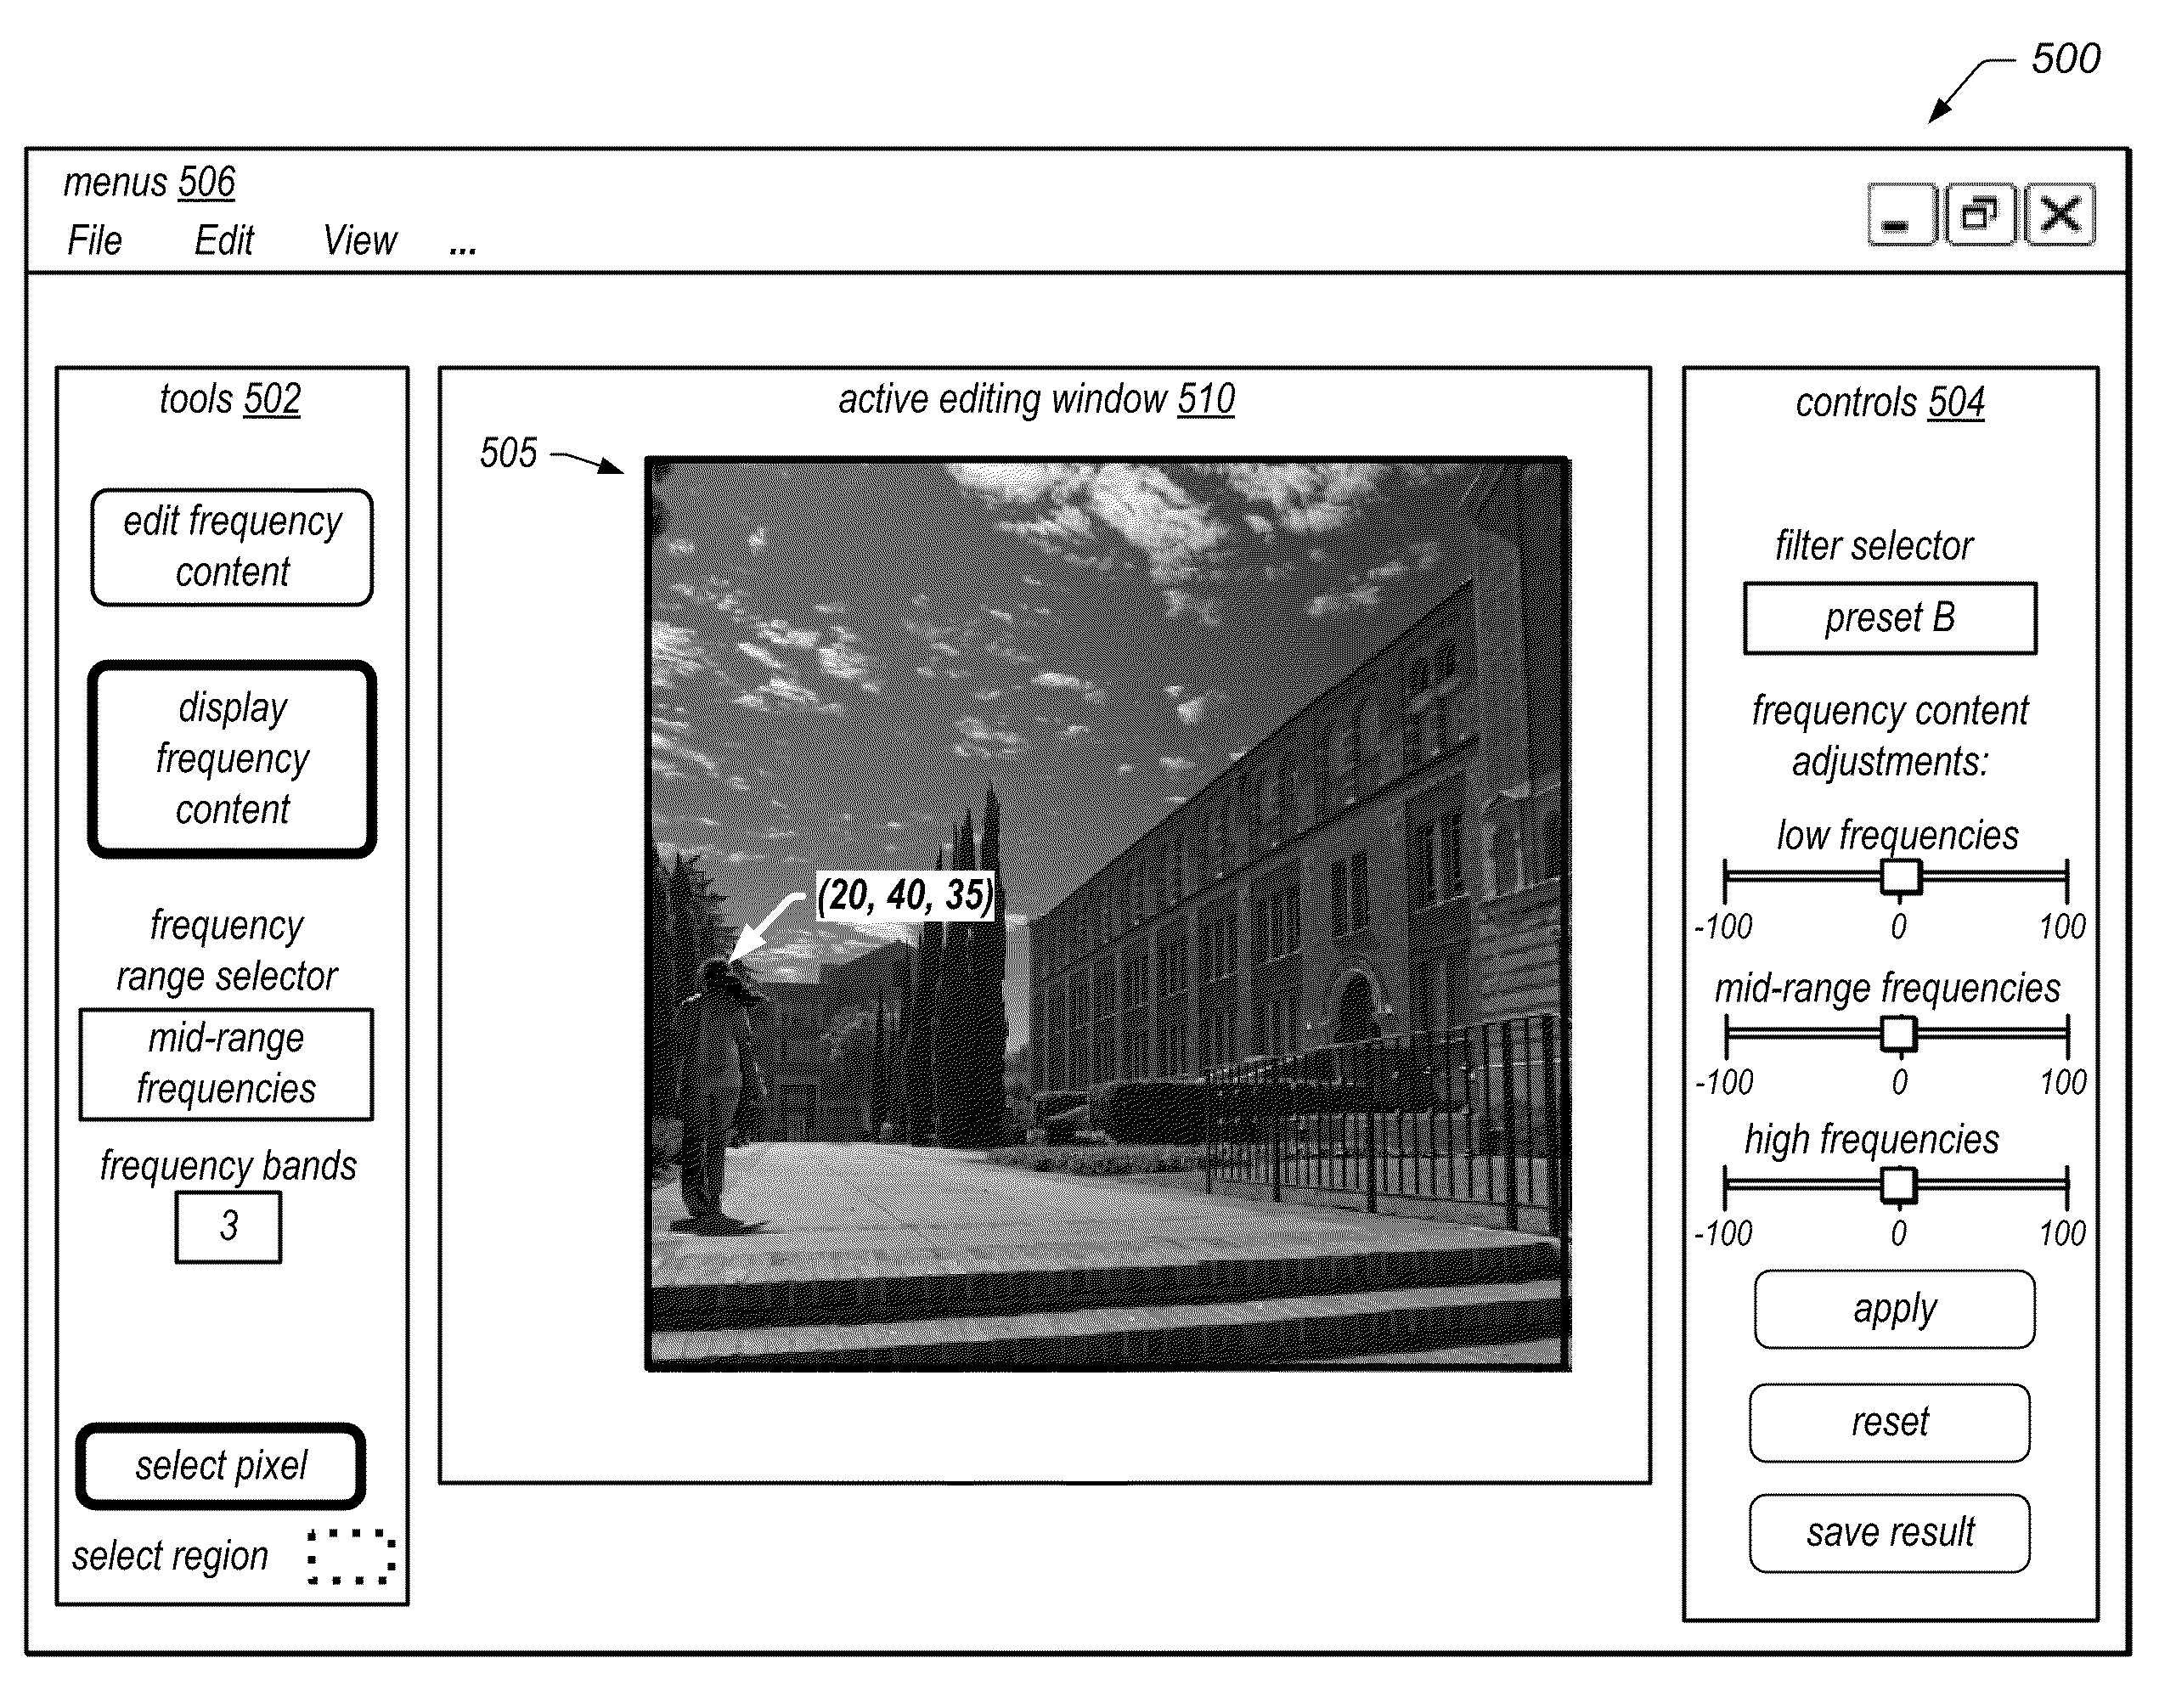 System and Method for Editing Frequency Content of Images